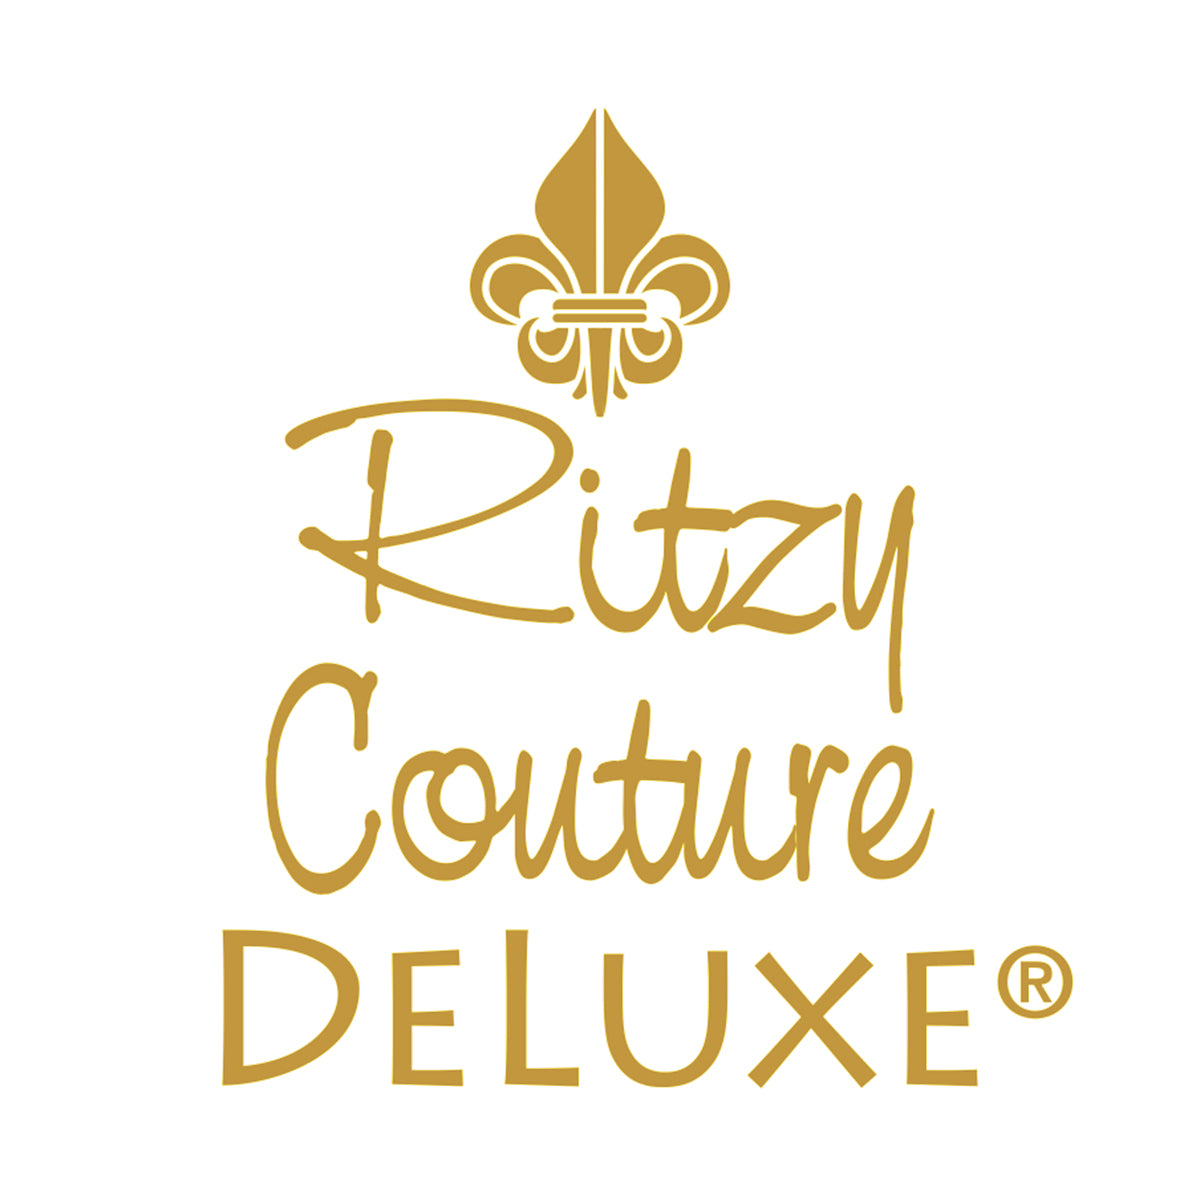 Ritzy Couture DeLuxe Christmas Ornaments Leverback Dangle Earrings 22k Gold Plated